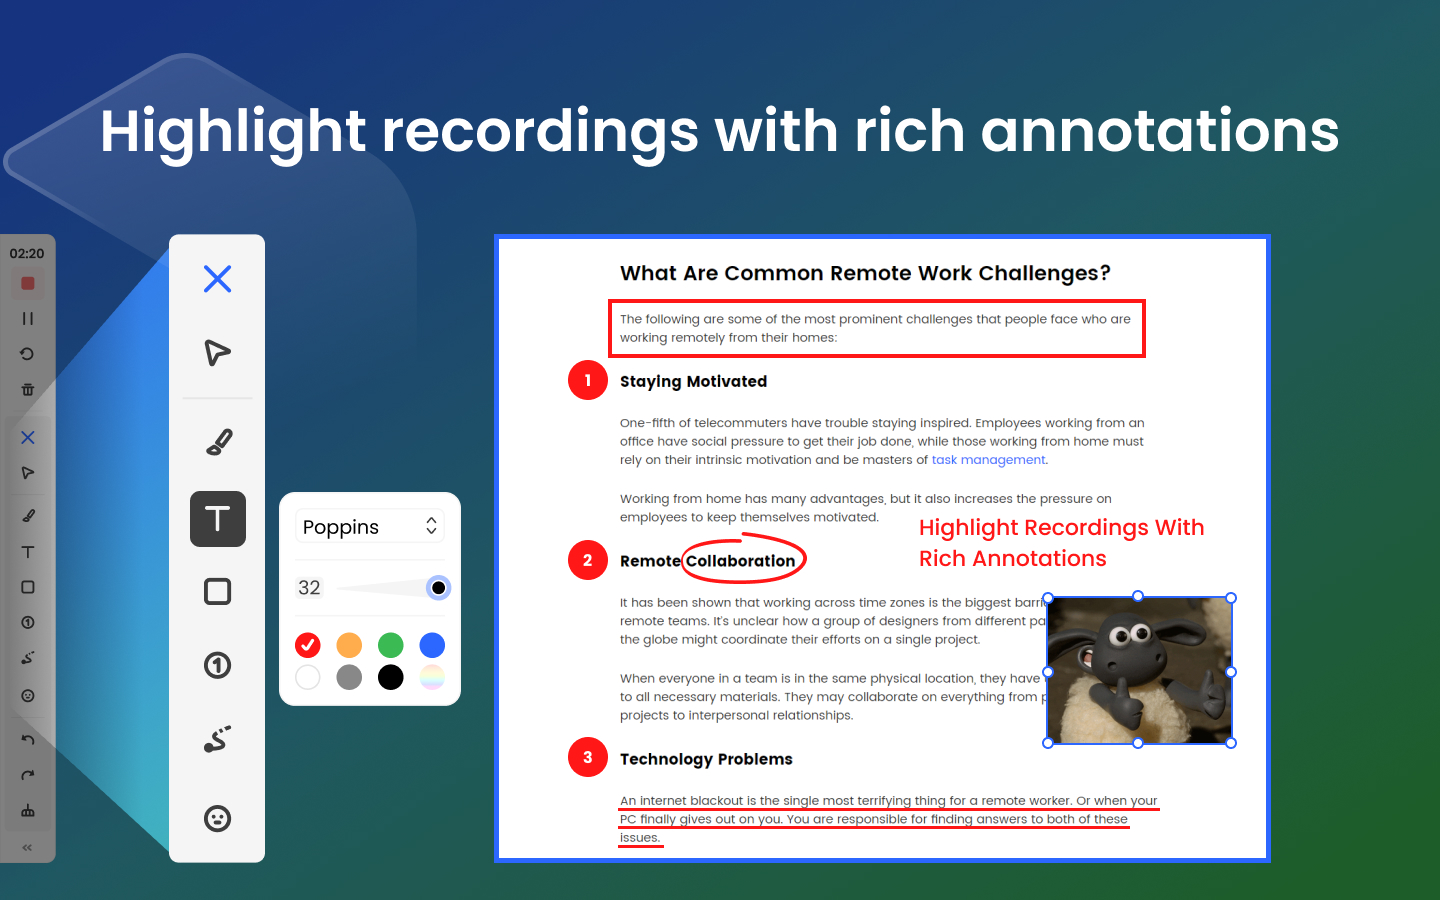 Highlight recordings with rich annotations